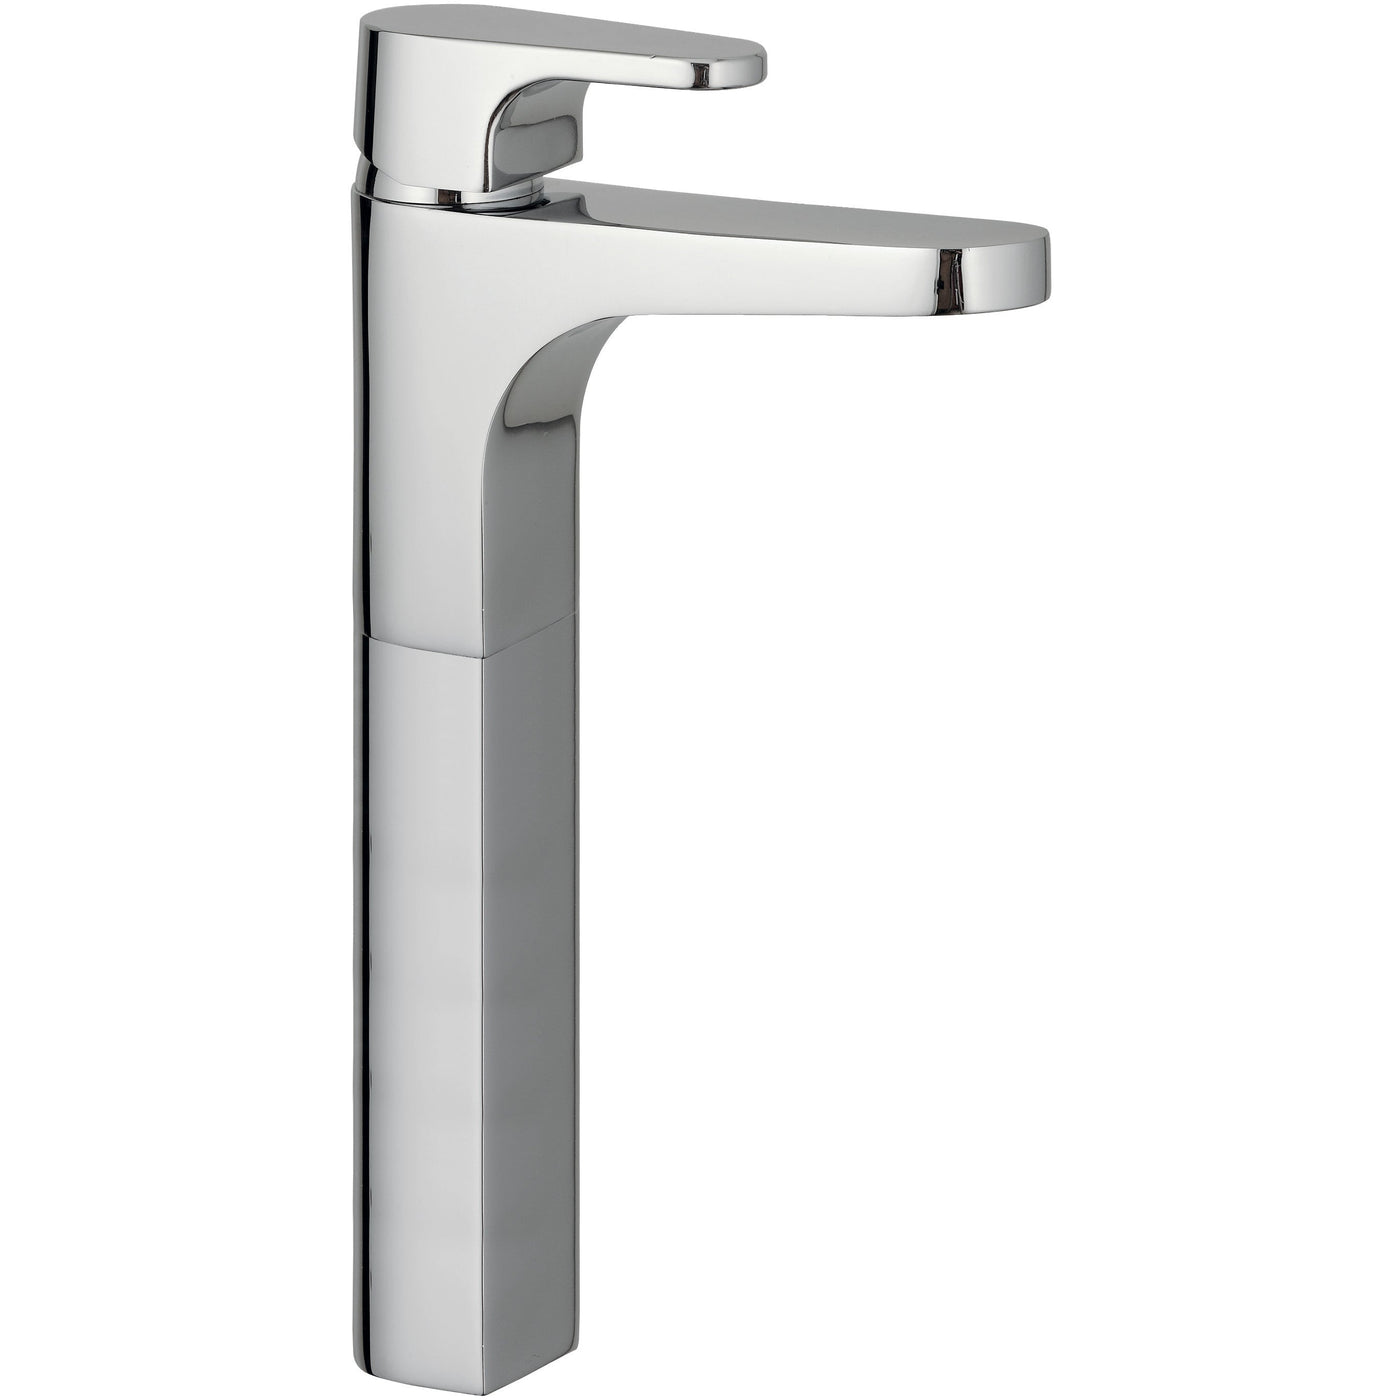 Cleo, Tall Single Lever Basin Mixer Tap - Ideal for countertop sinks - Letta London - Basin Taps